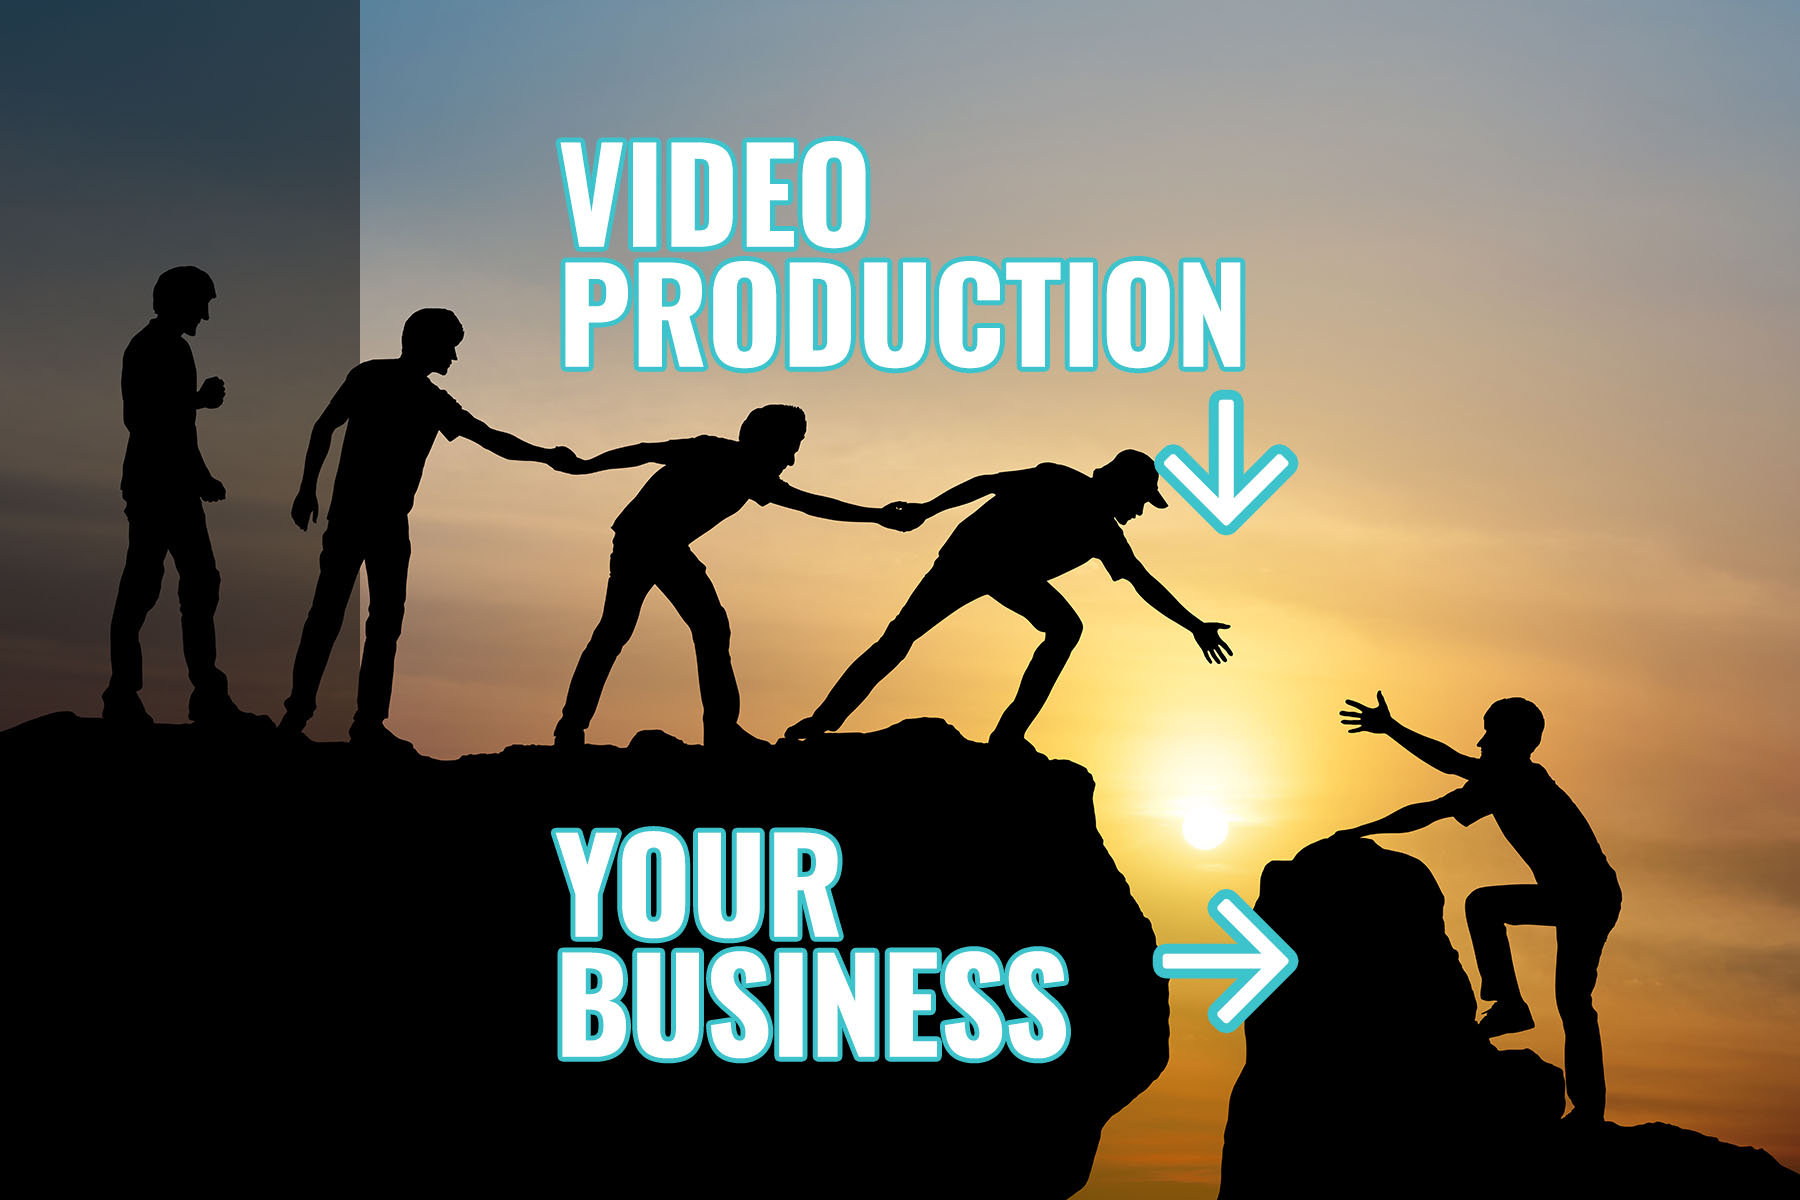 video production for business - helping people